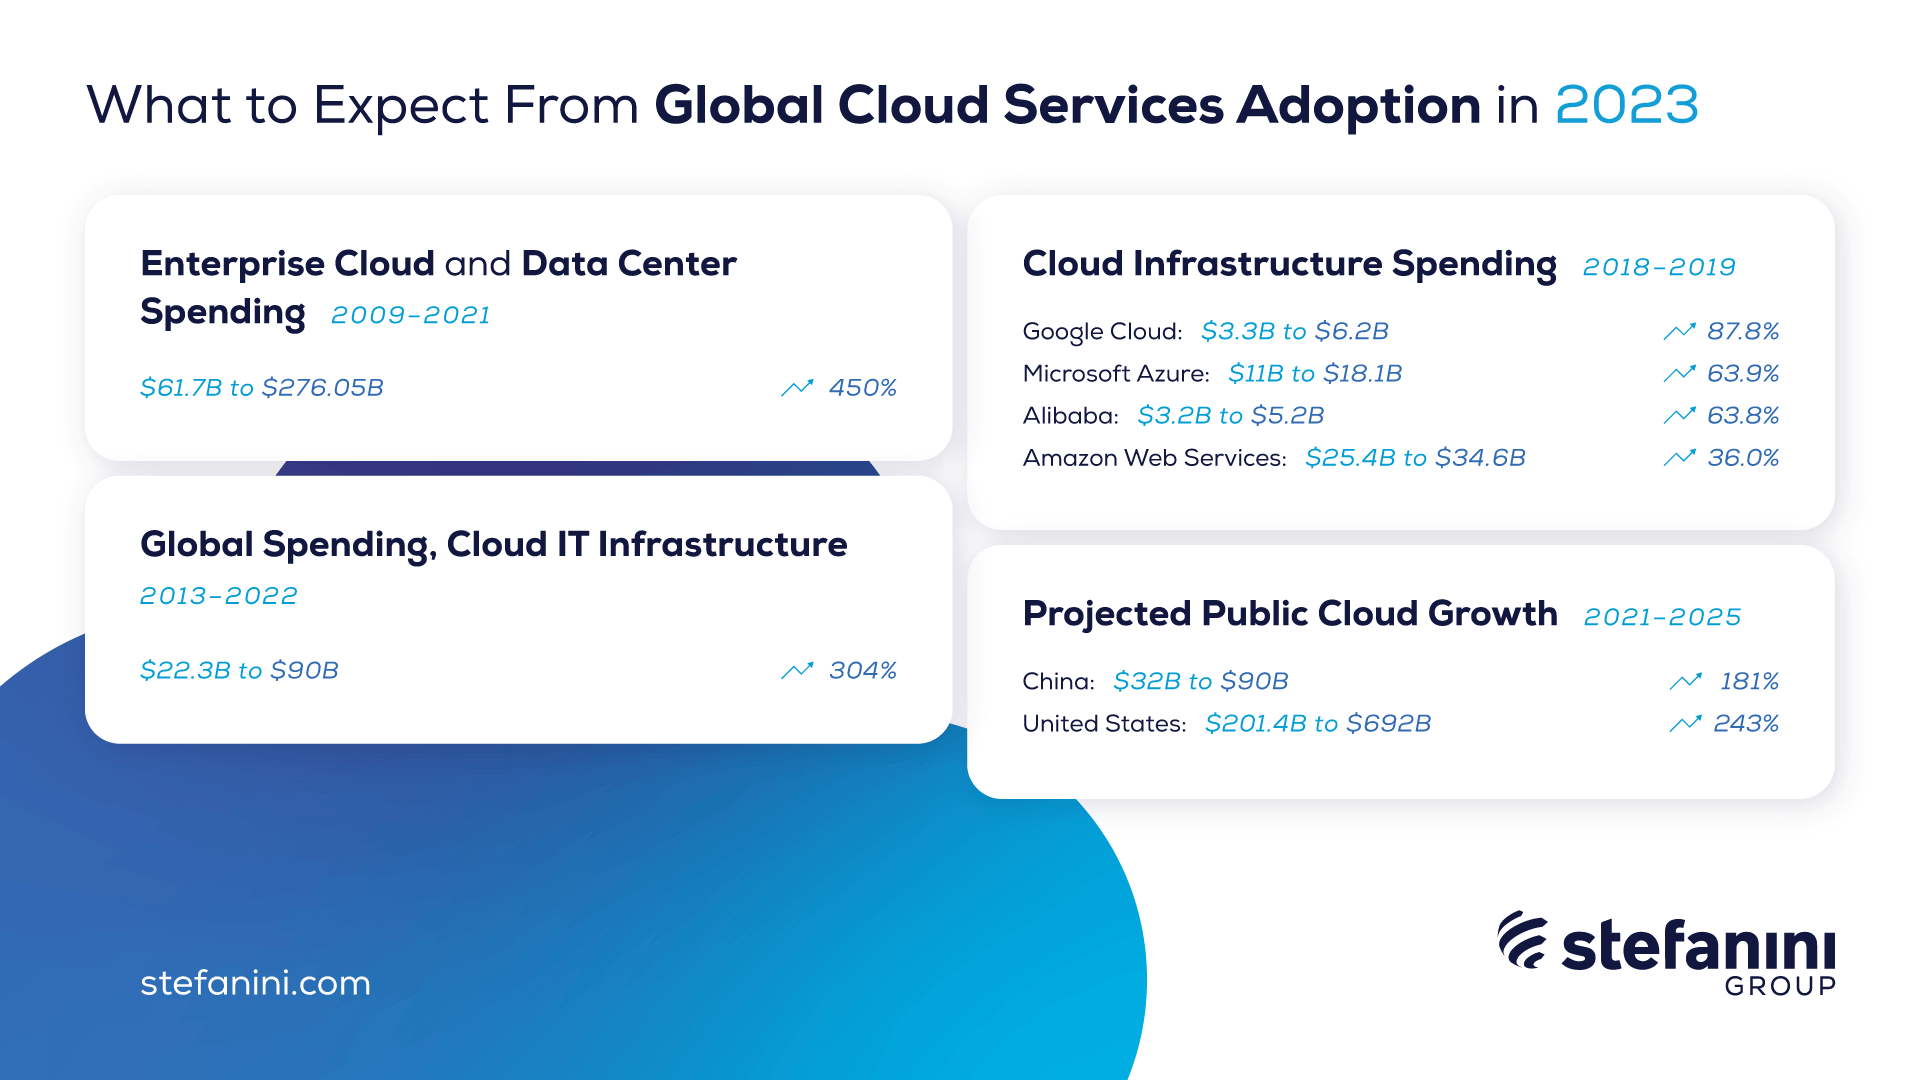 Global Cloud Services Adoption To Accelerate In 2023